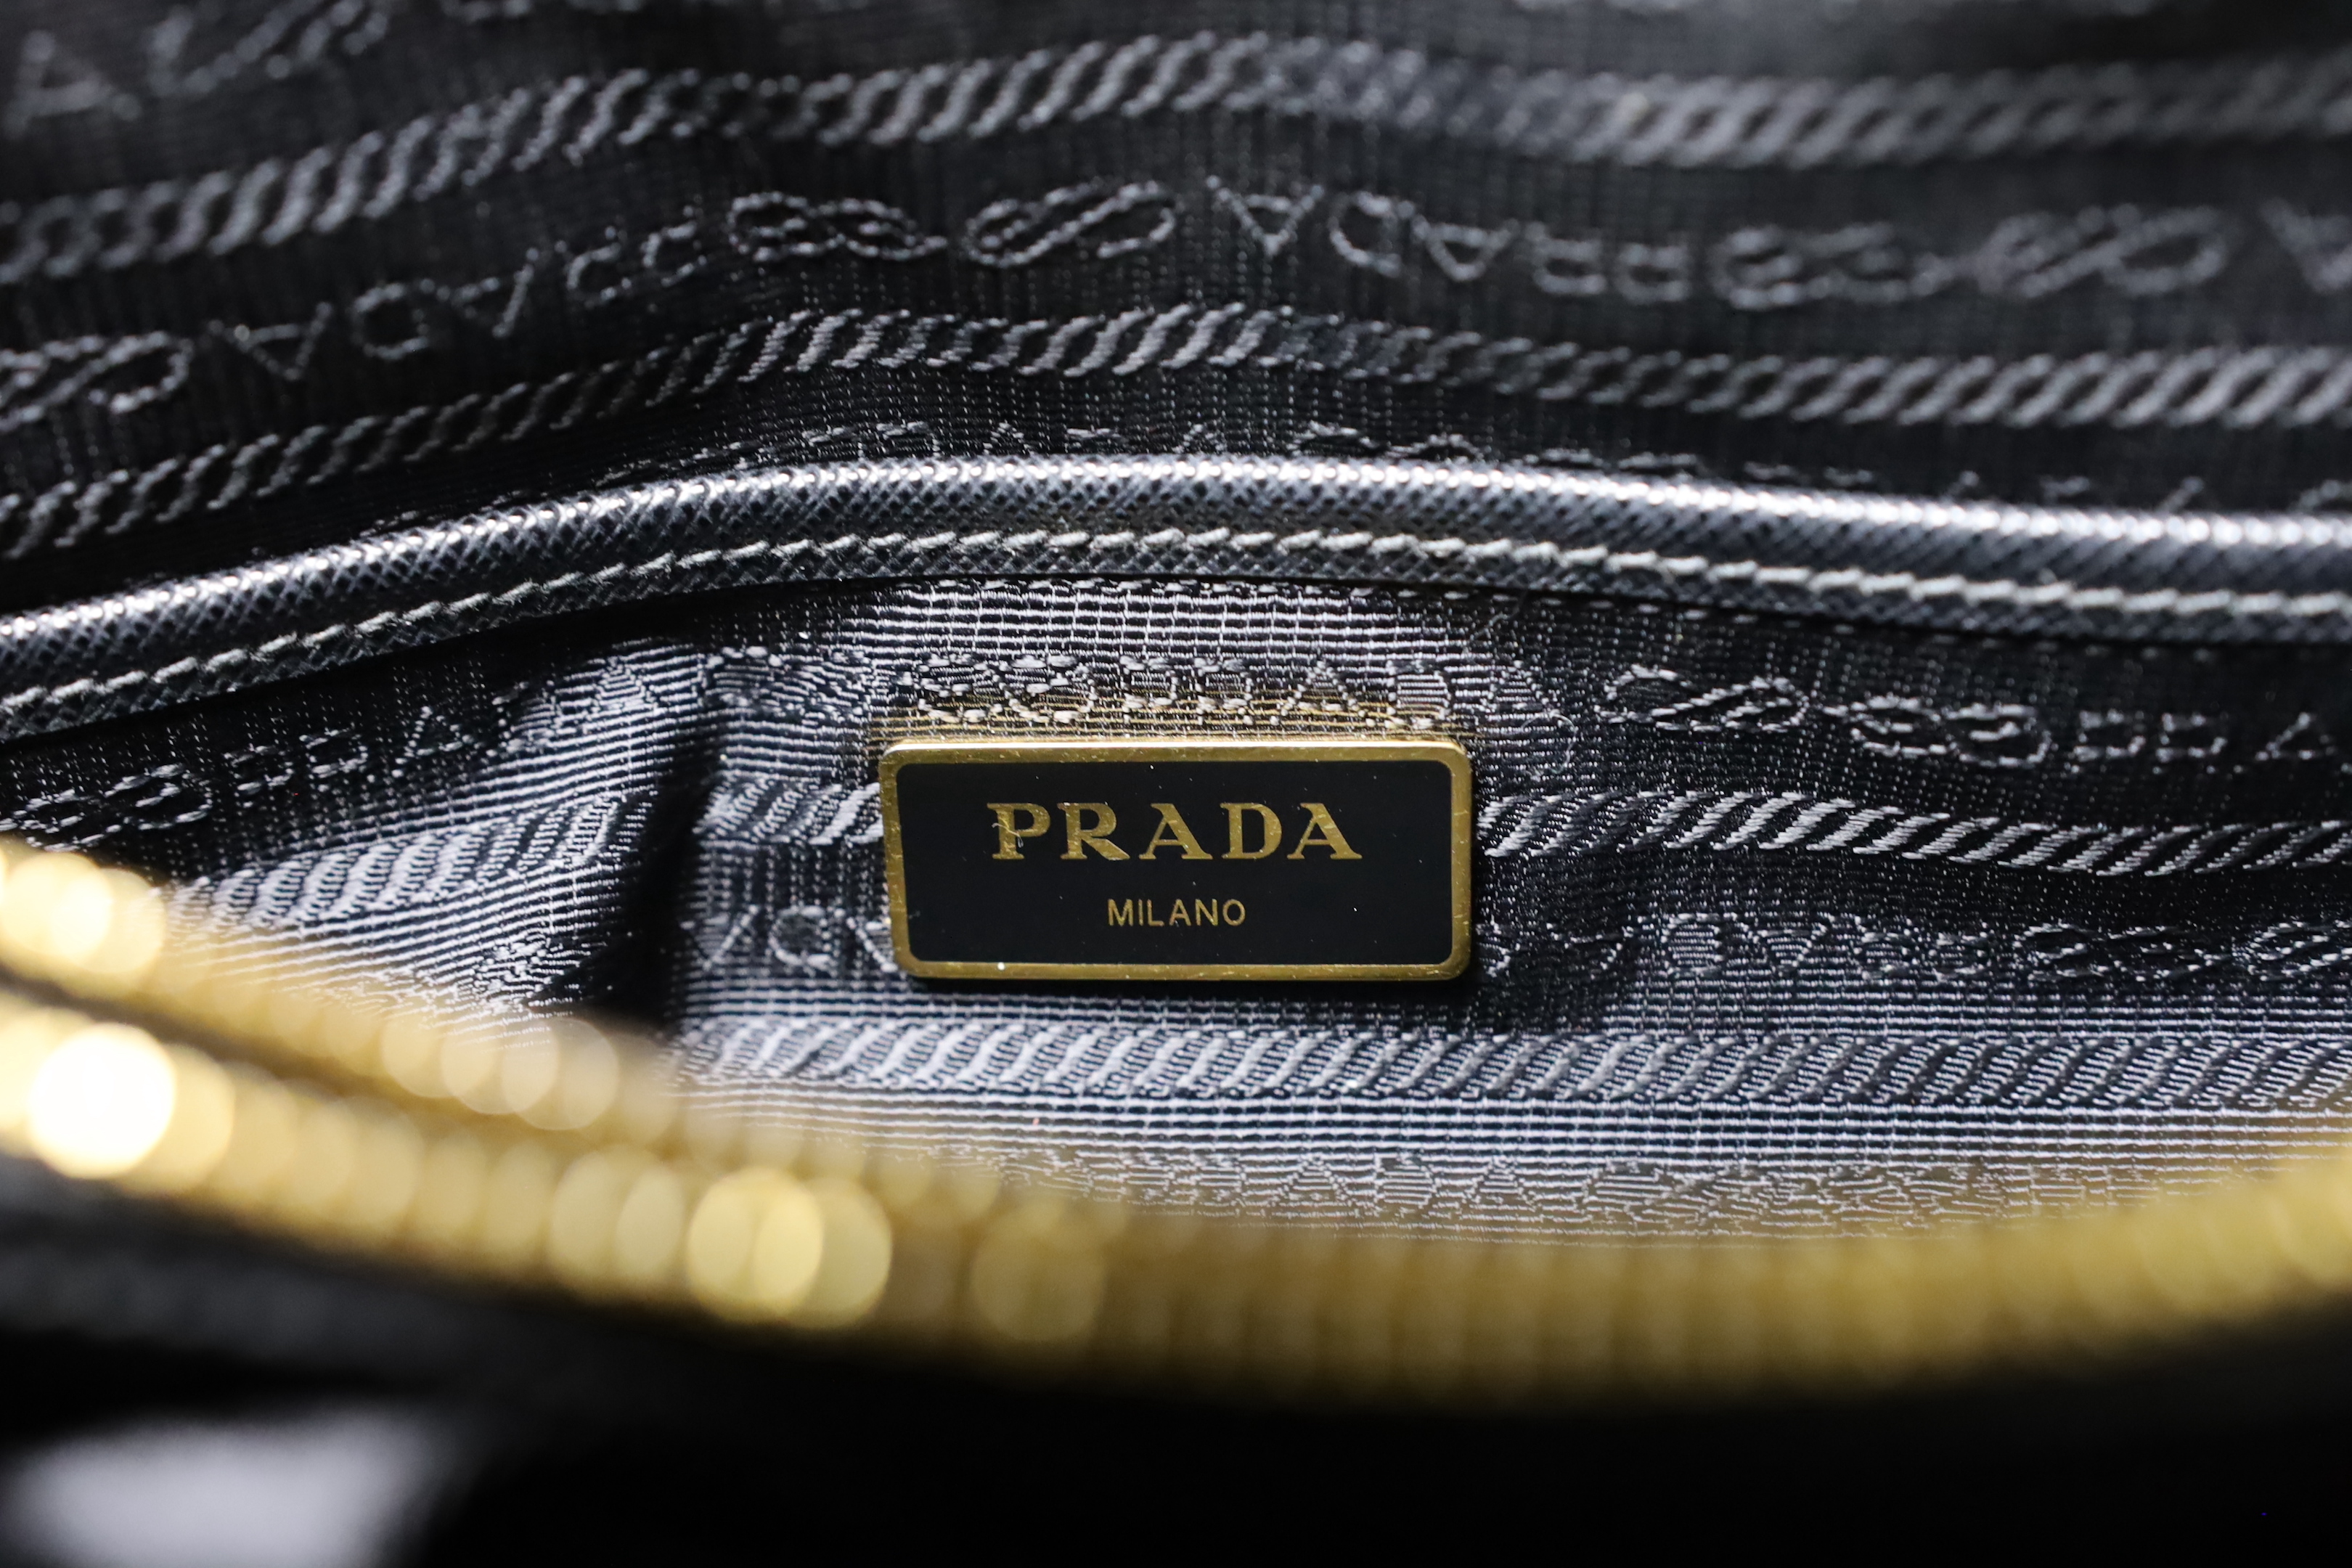 A Prada bag, with authenticity cards and dust bag